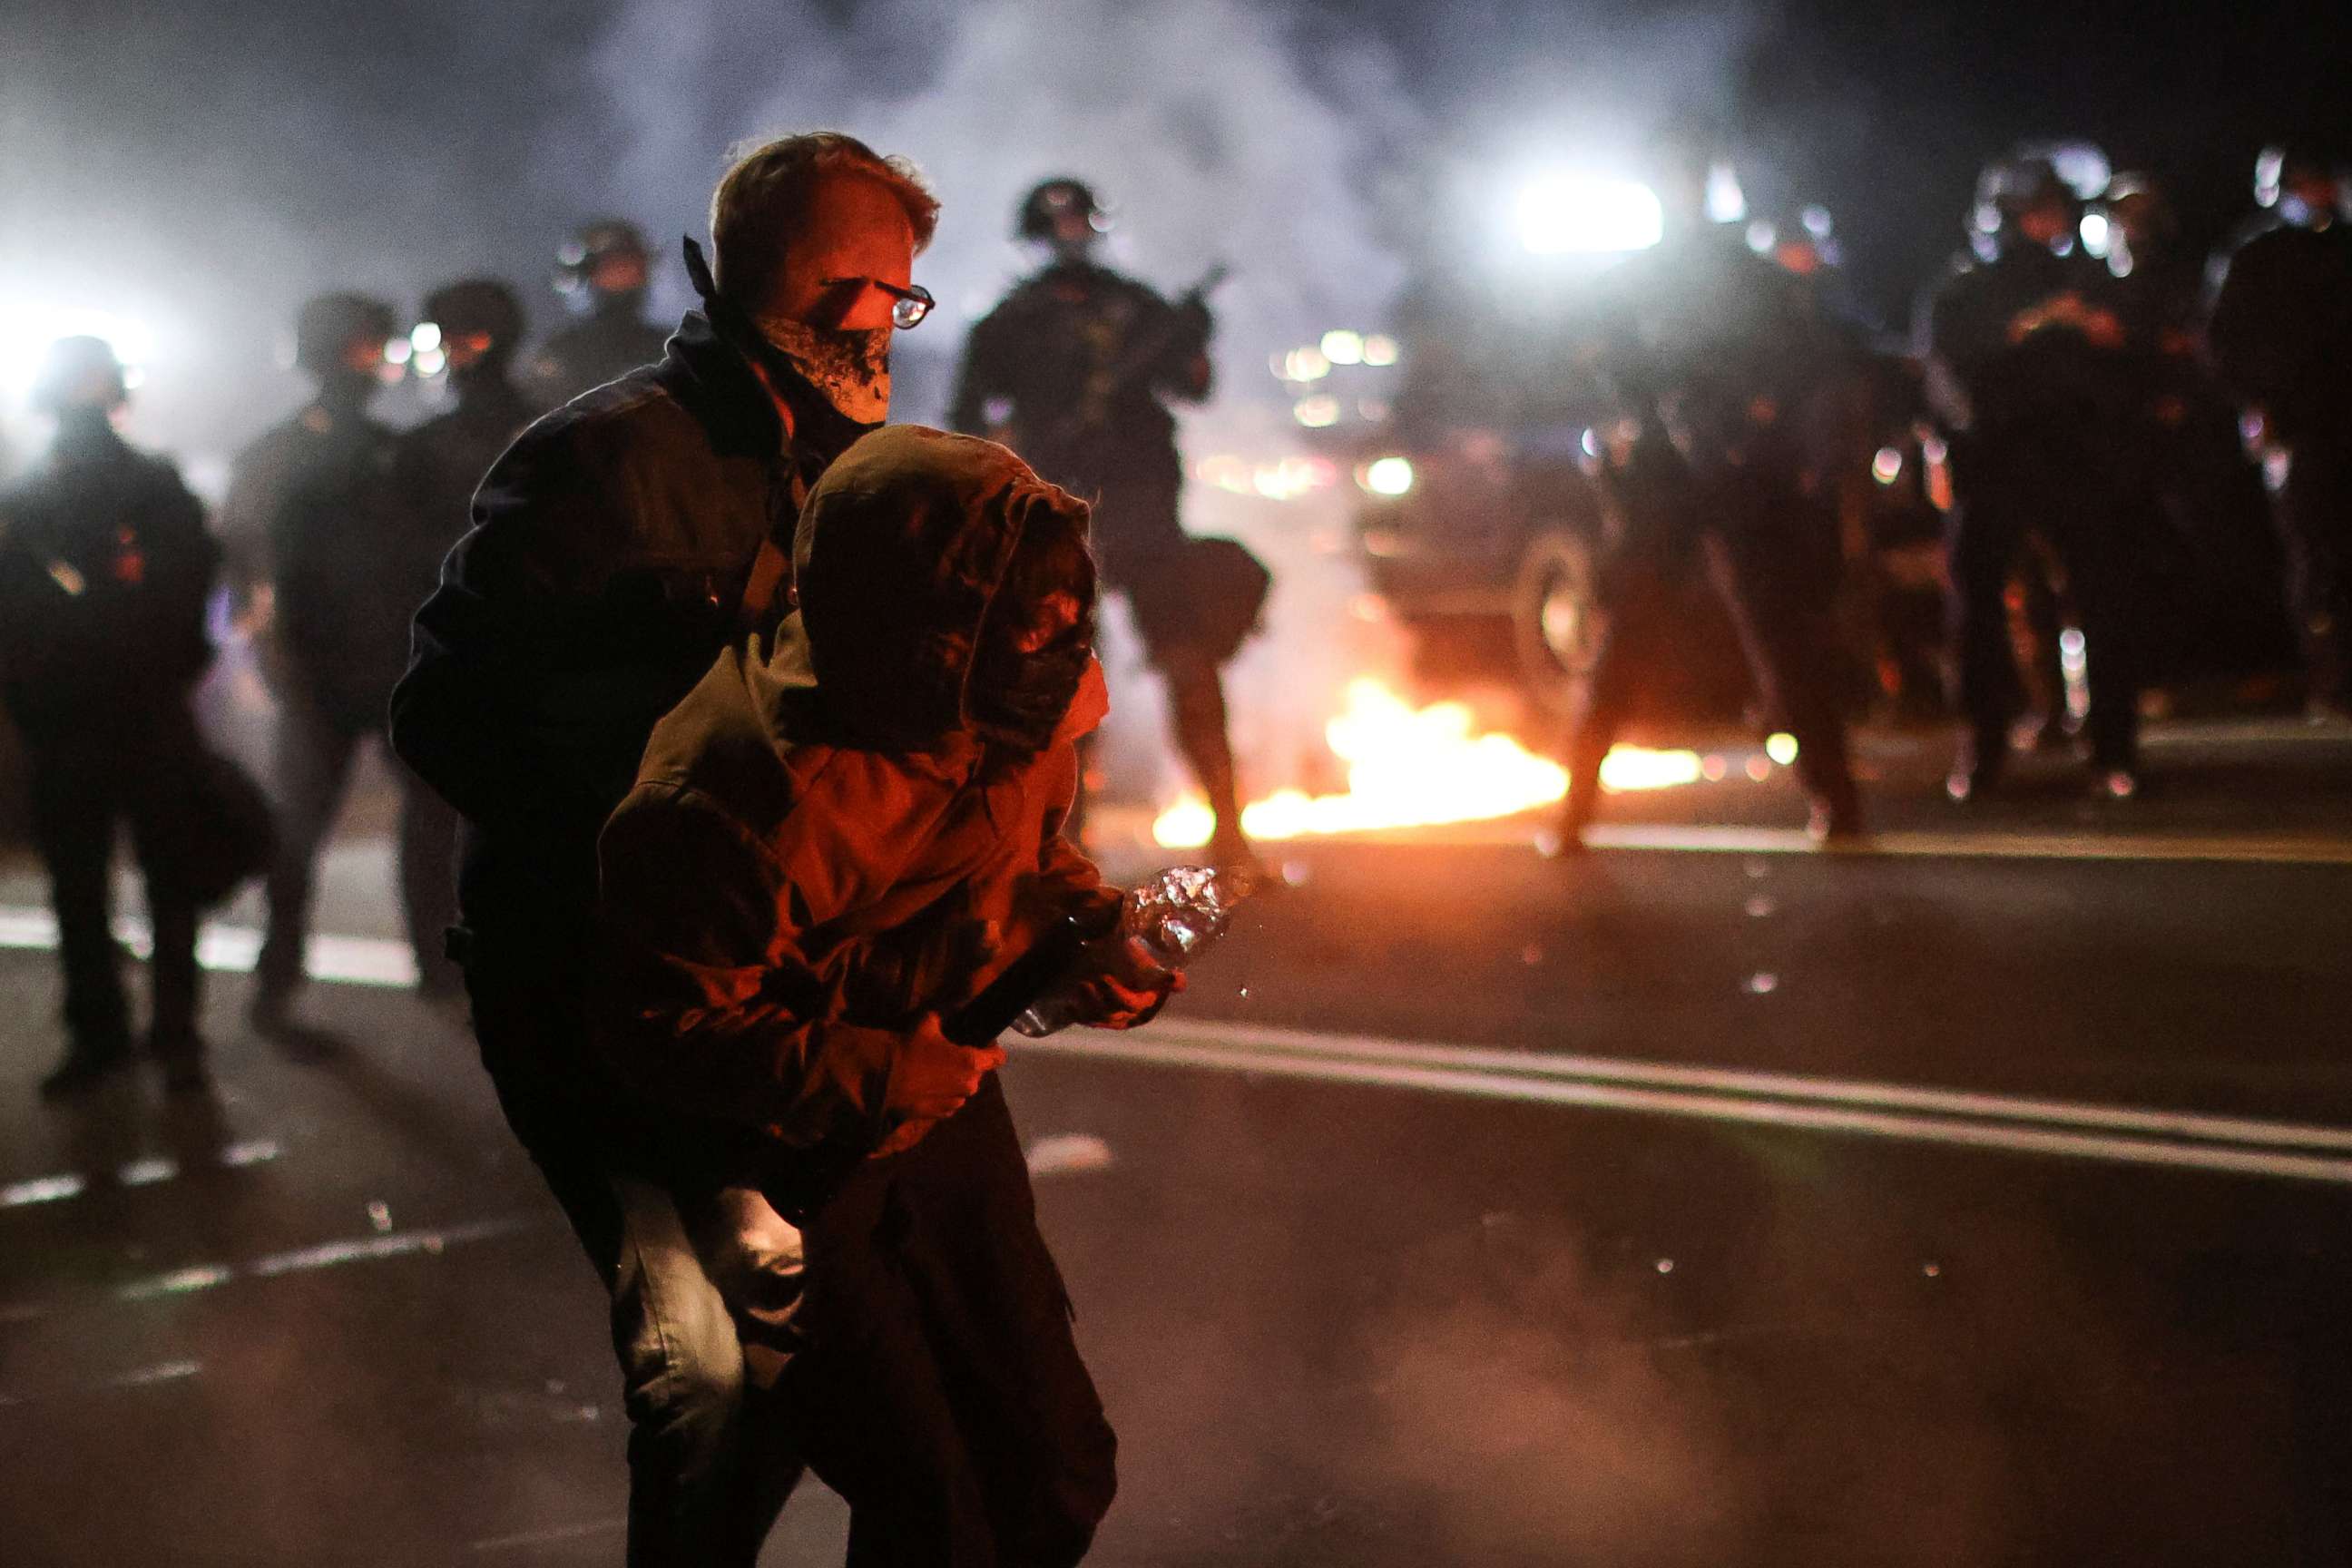 PHOTO: A protester is helped by another to retreat after clashing with the police on the 100th consecutive night of protests against police violence and racial inequality, in Portland, Oregon, on September 5, 2020.